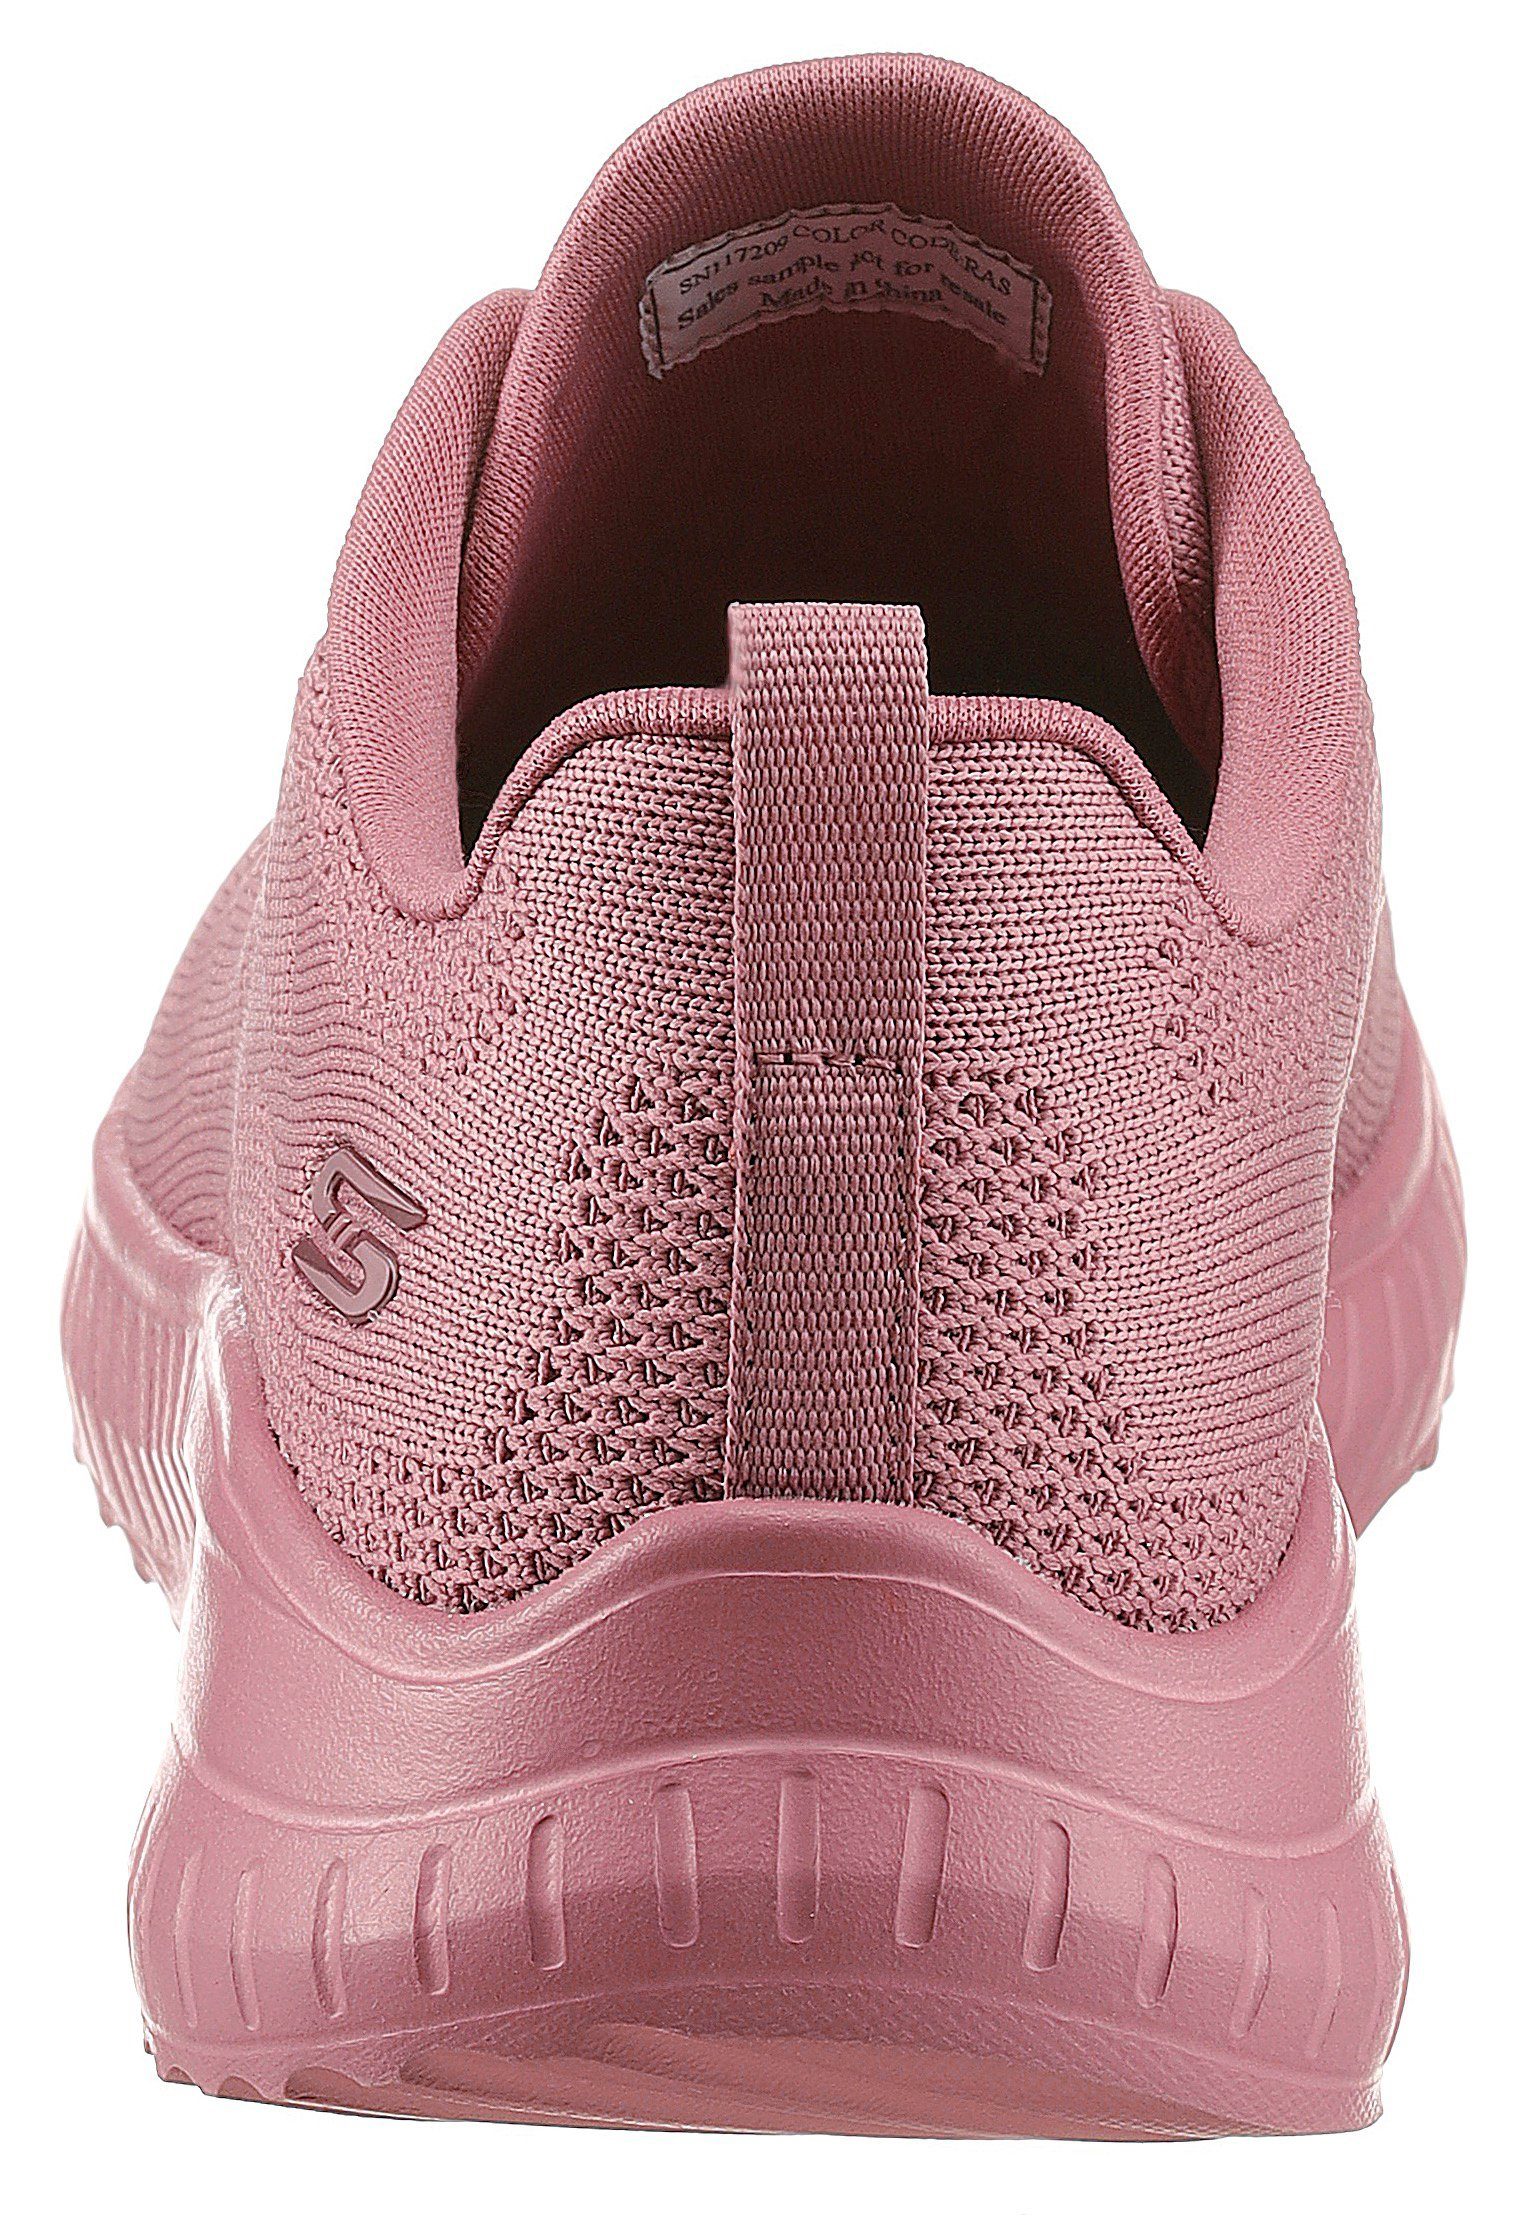 Skechers BOBS SQUAD CHAOS FACE komfortabler himbeere Innensohle OFF Sneaker mit